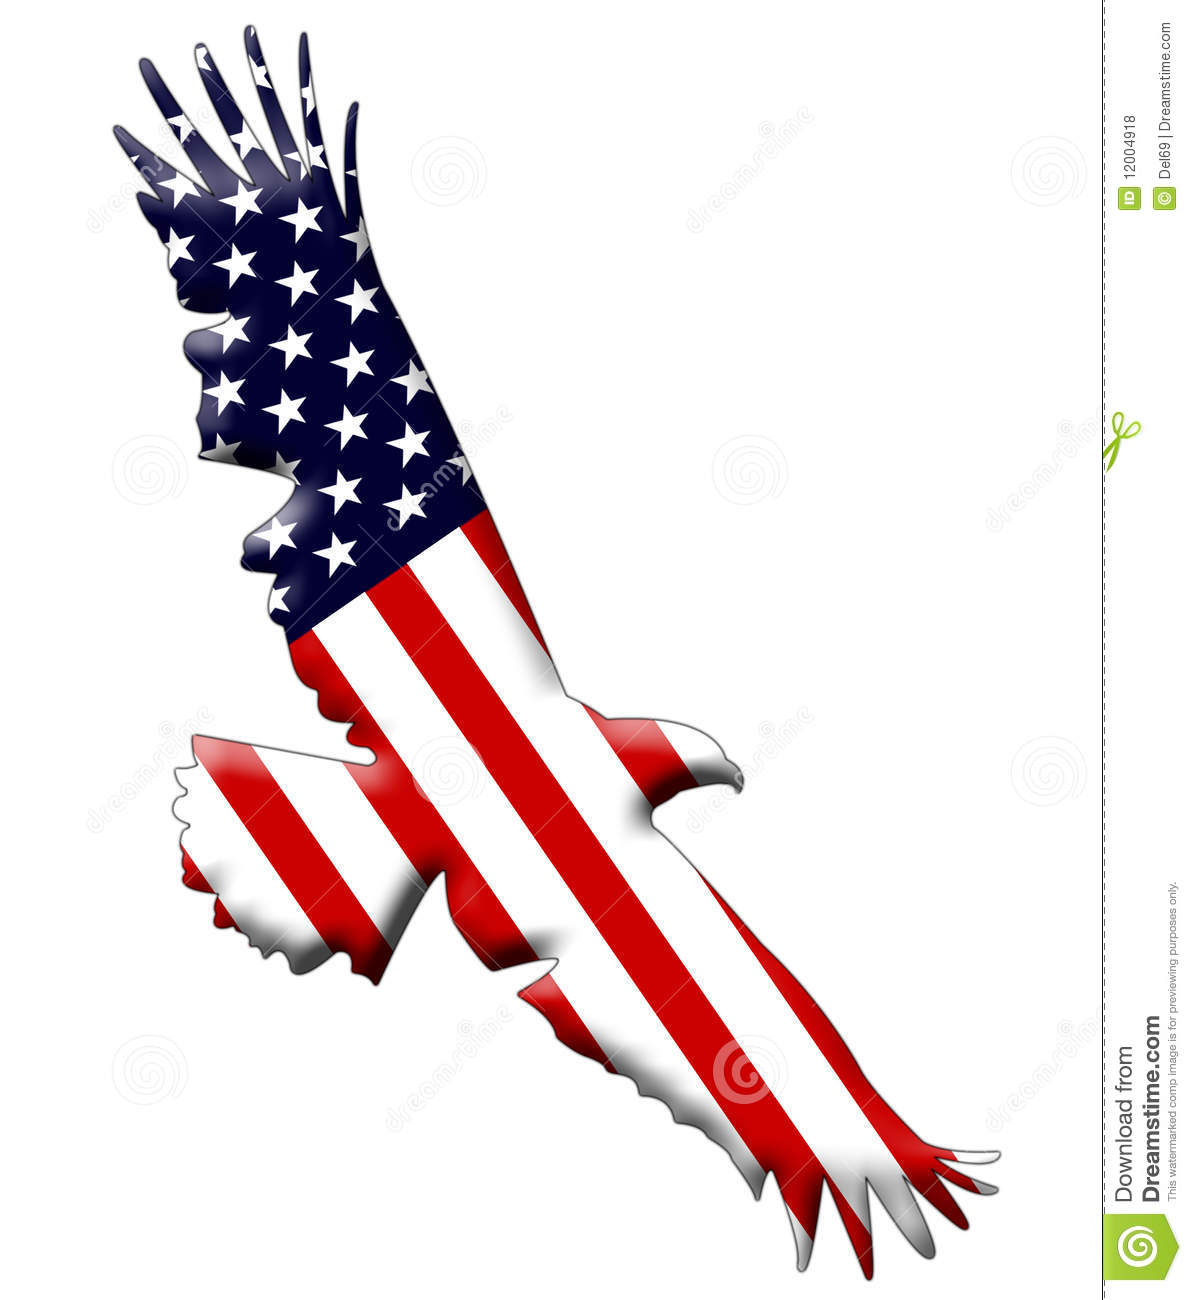 American Eagle Clipart   Clipart Panda   Free Clipart Images